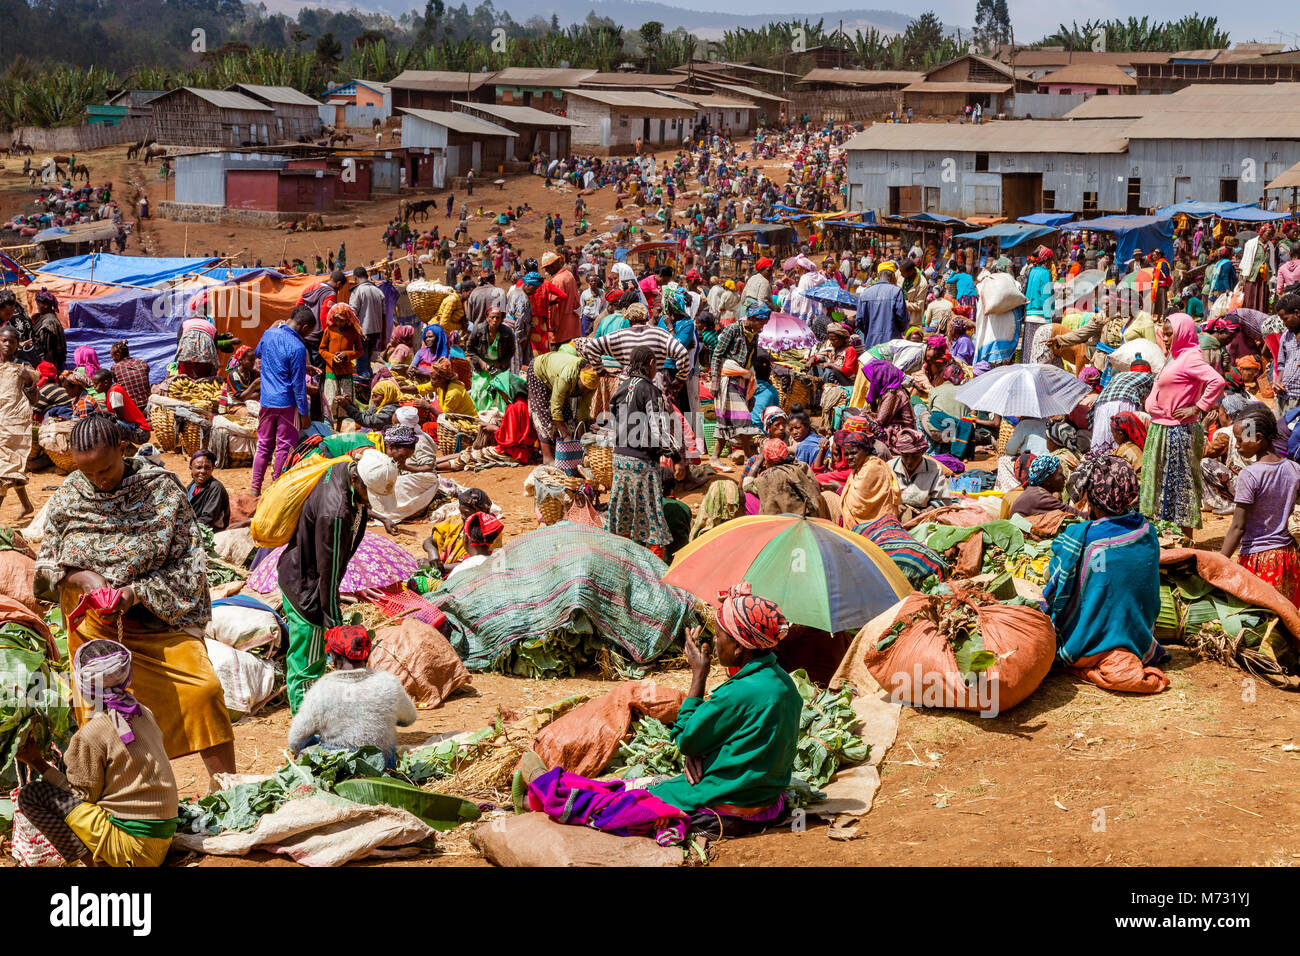 The Famous Saturday Market At The Dorze Village Of Chencha, High Up In The Guge Mountains, Gamo Gofa Zone, Ethiopia Stock Photo